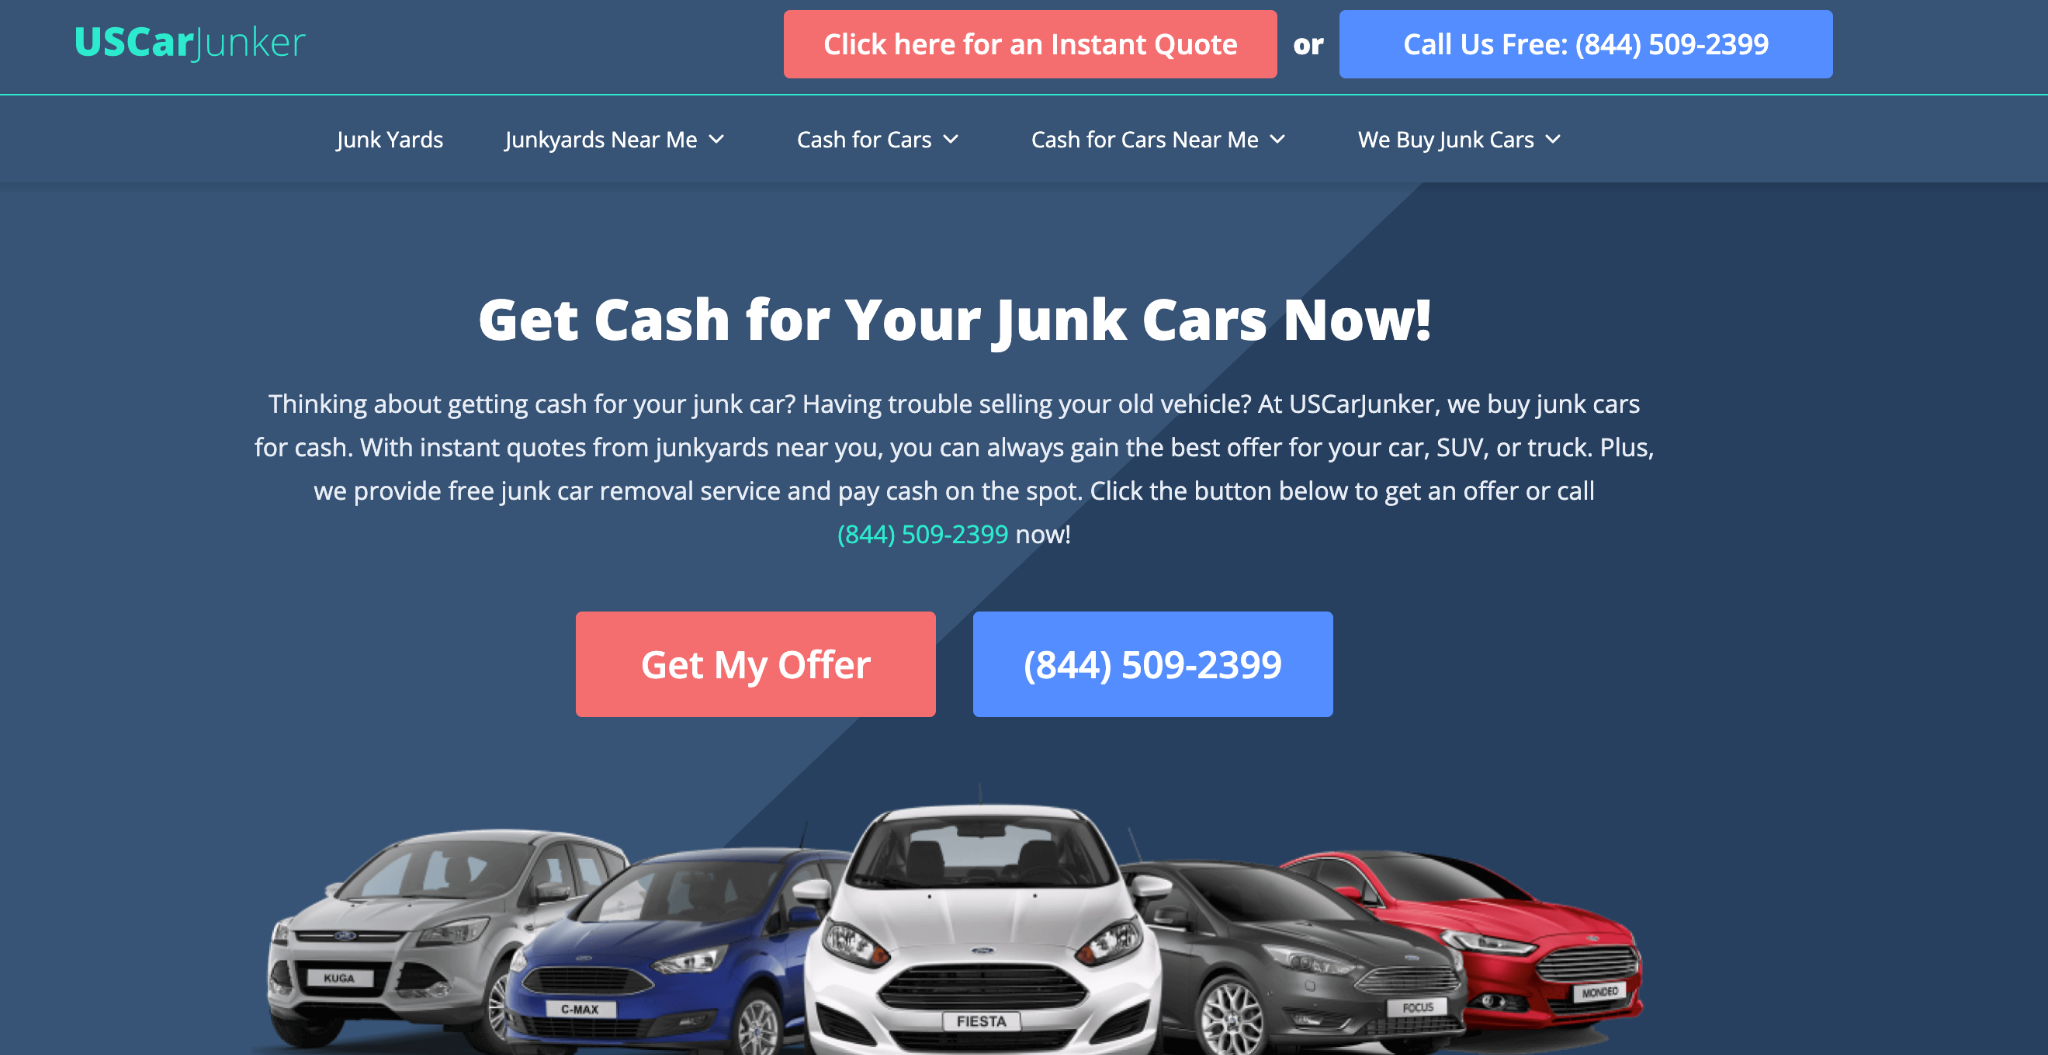 What Is the Best Way to Sell a Junk Car for Cash